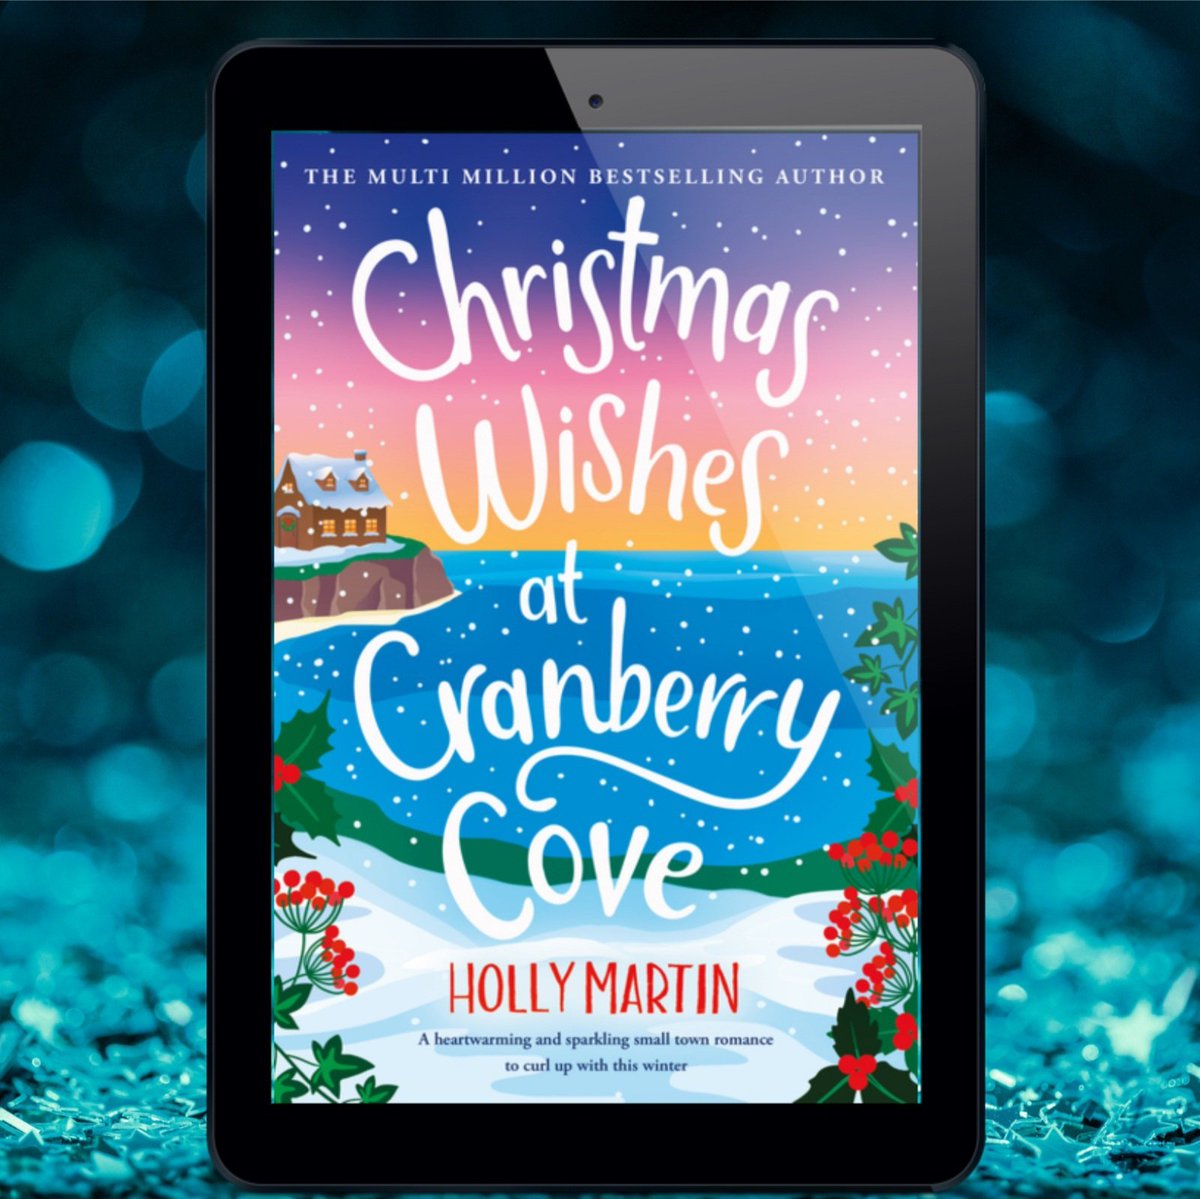 You've all been asking about Shay and Orla's story, so here it is, the beautiful sparkly cover for Christmas Wishes at Cranberry Cove. It might just be the most beautiful cover ever and you can preorder your copy here today. geni.us/CranberryCove